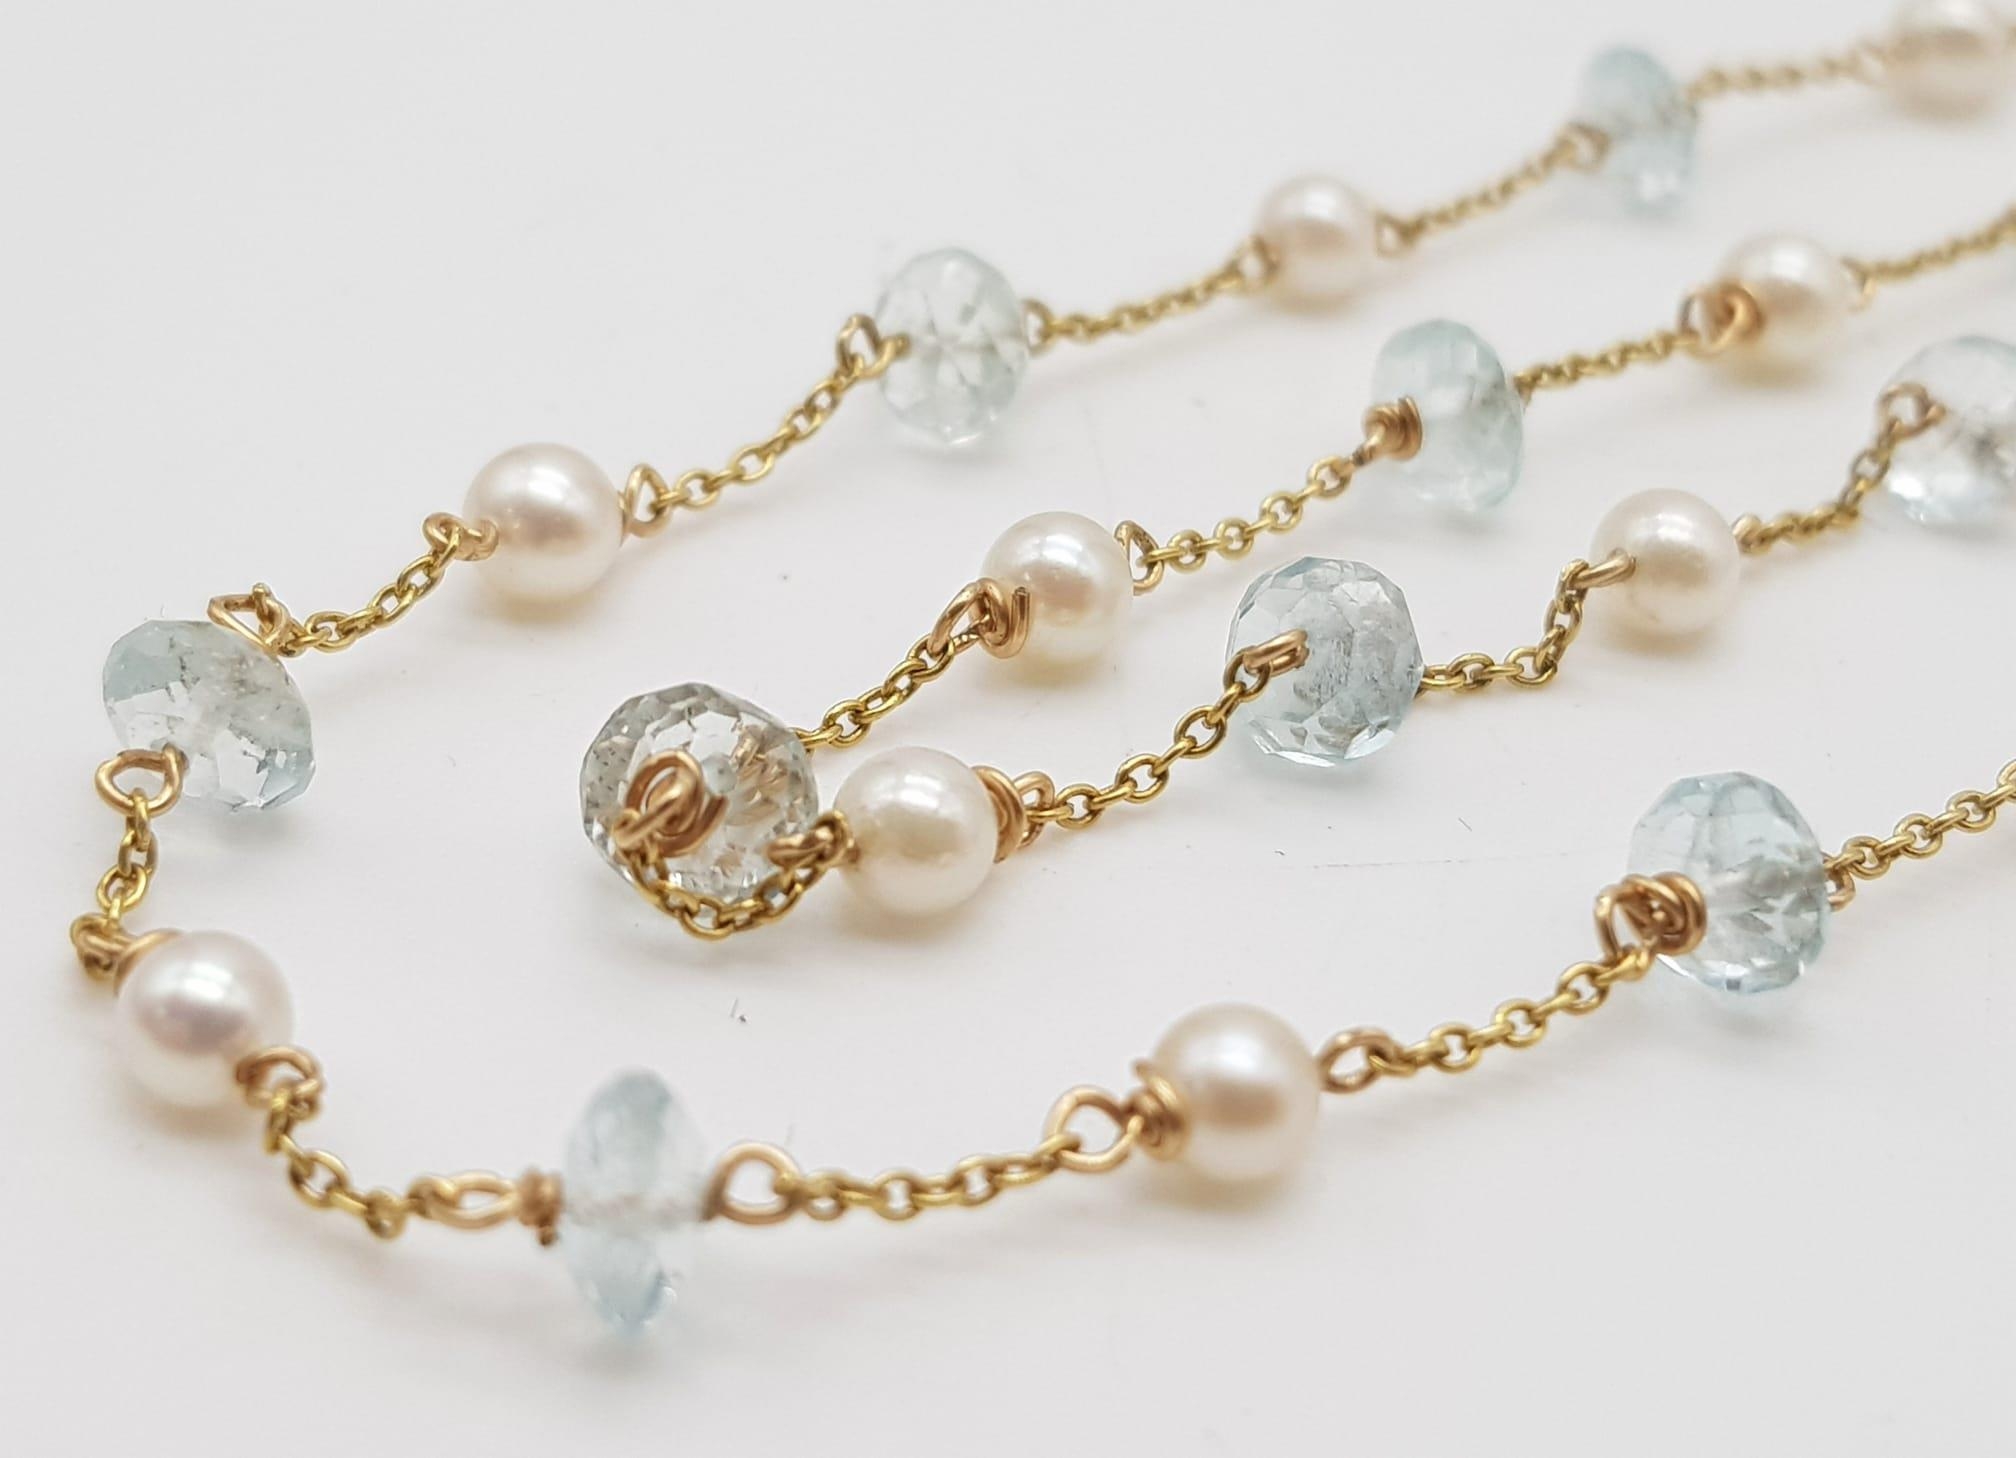 A Vintage Seed Pearl and White Quartz 14K Yellow Gold Necklace. 4.5g total weight. 44cm. - Image 2 of 4